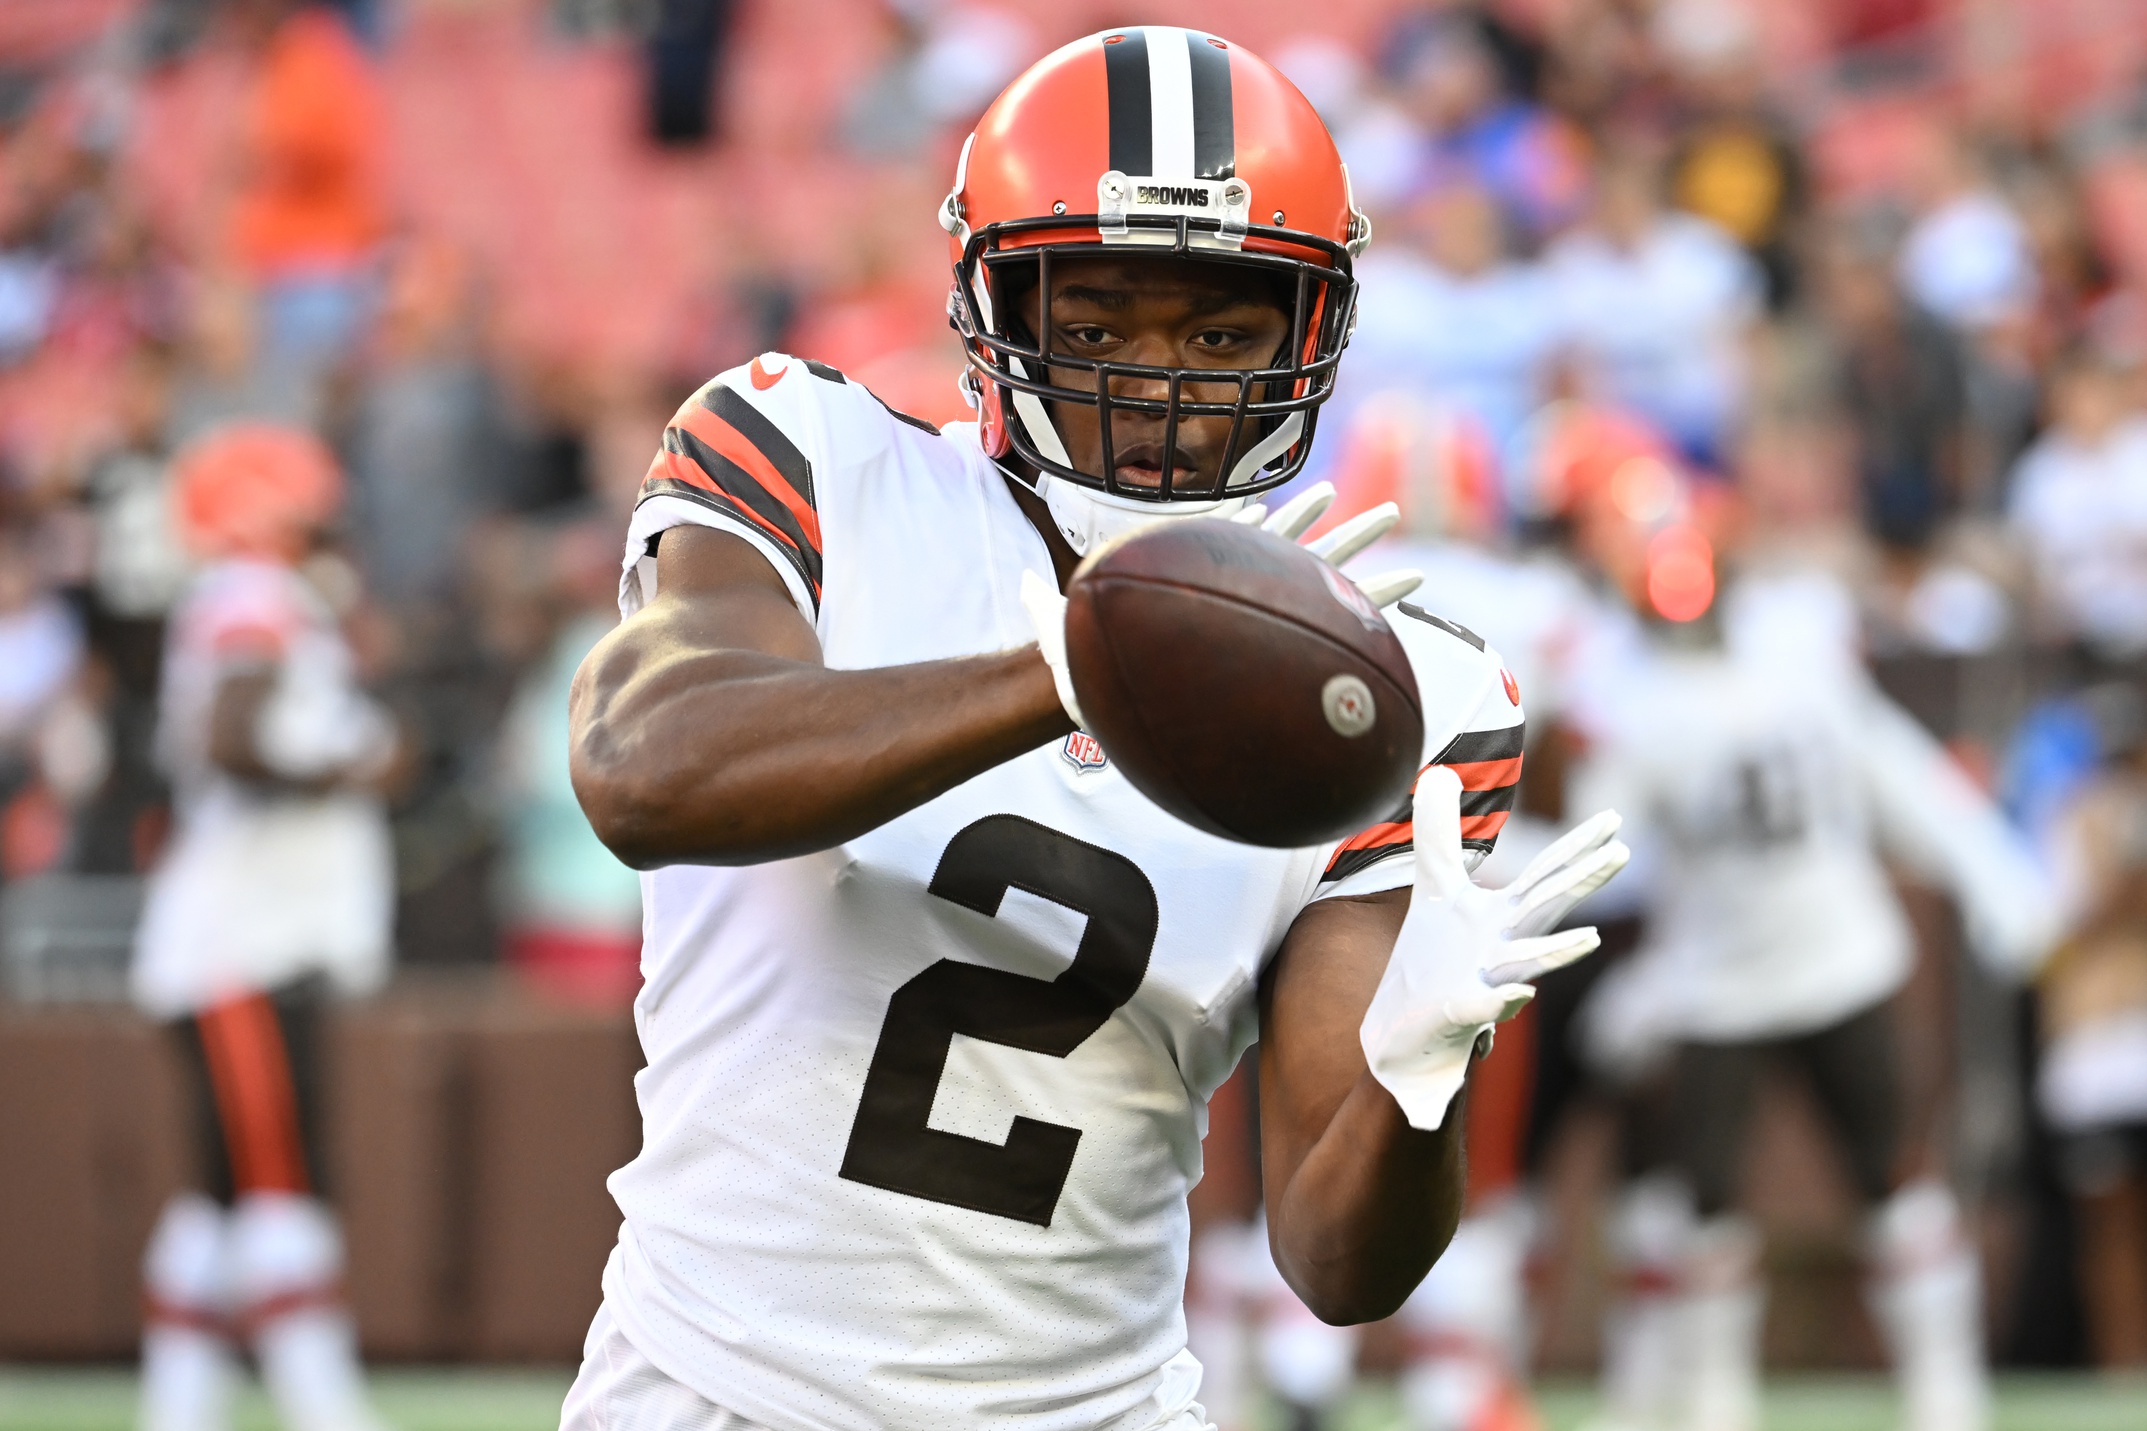 Browns vs. Steelers NFL Week 3 Preview and Prediction - Dawgs By Nature